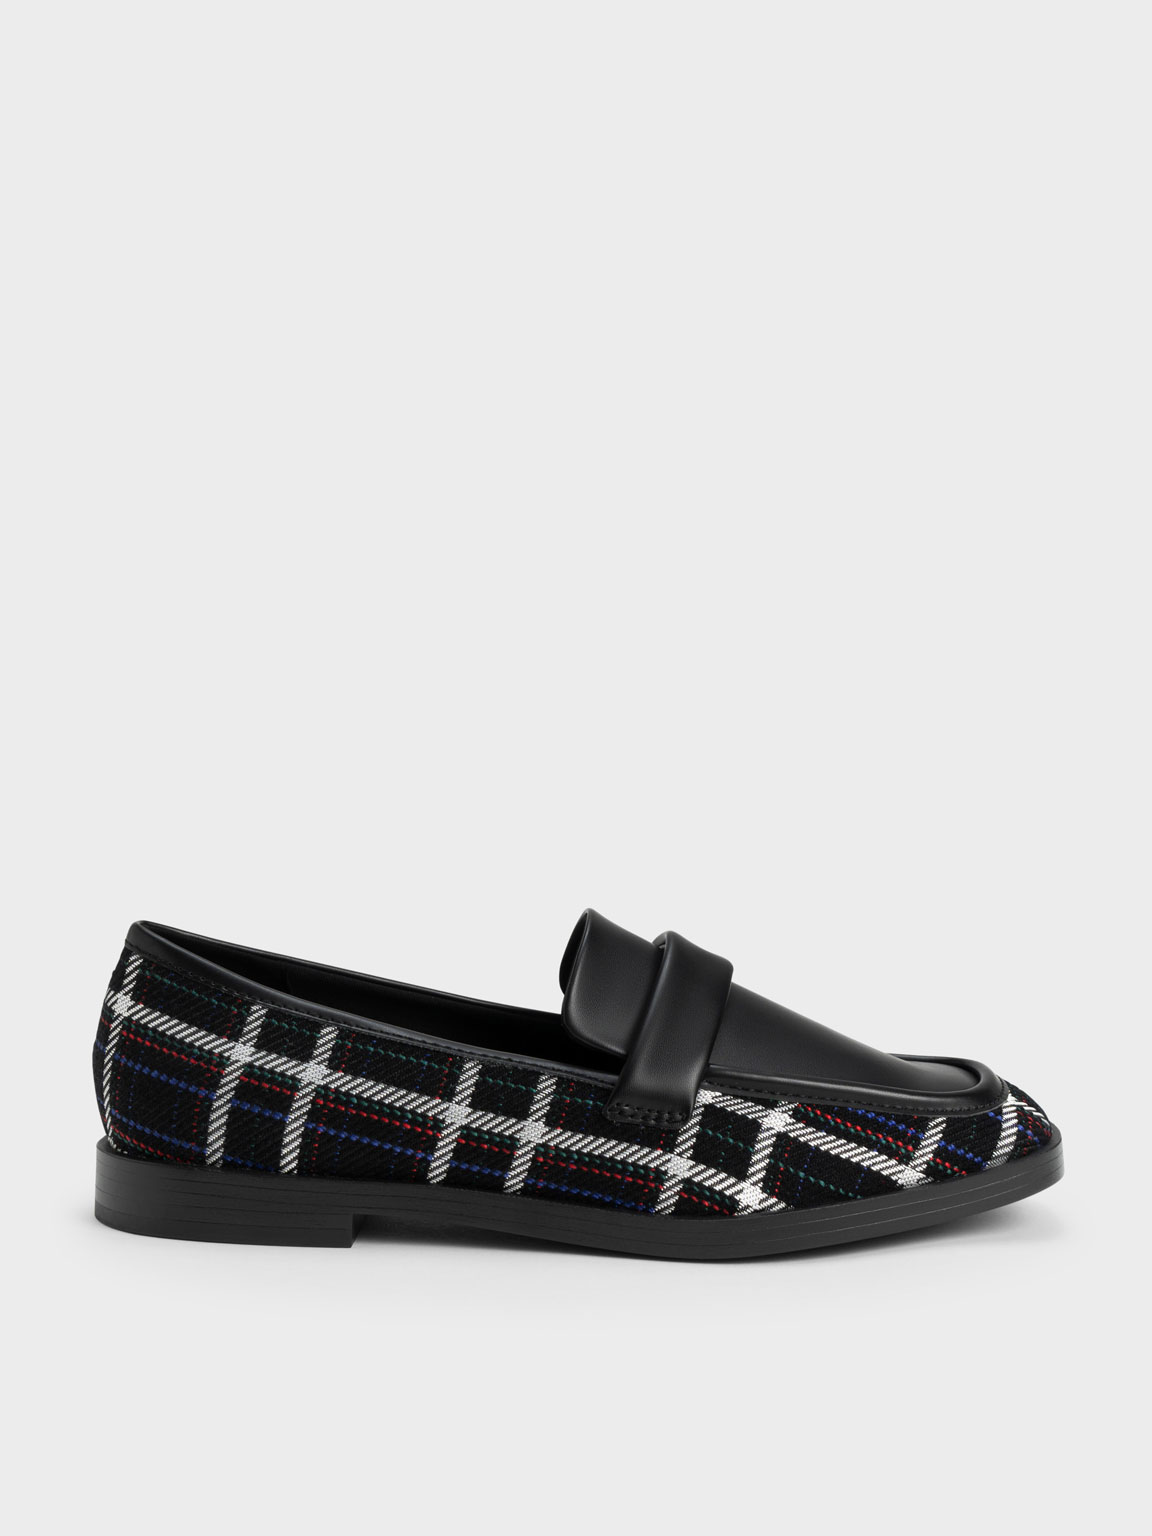 Multicoloured Woven Square-Toe Penny Loafers - CHARLES & KEITH SG